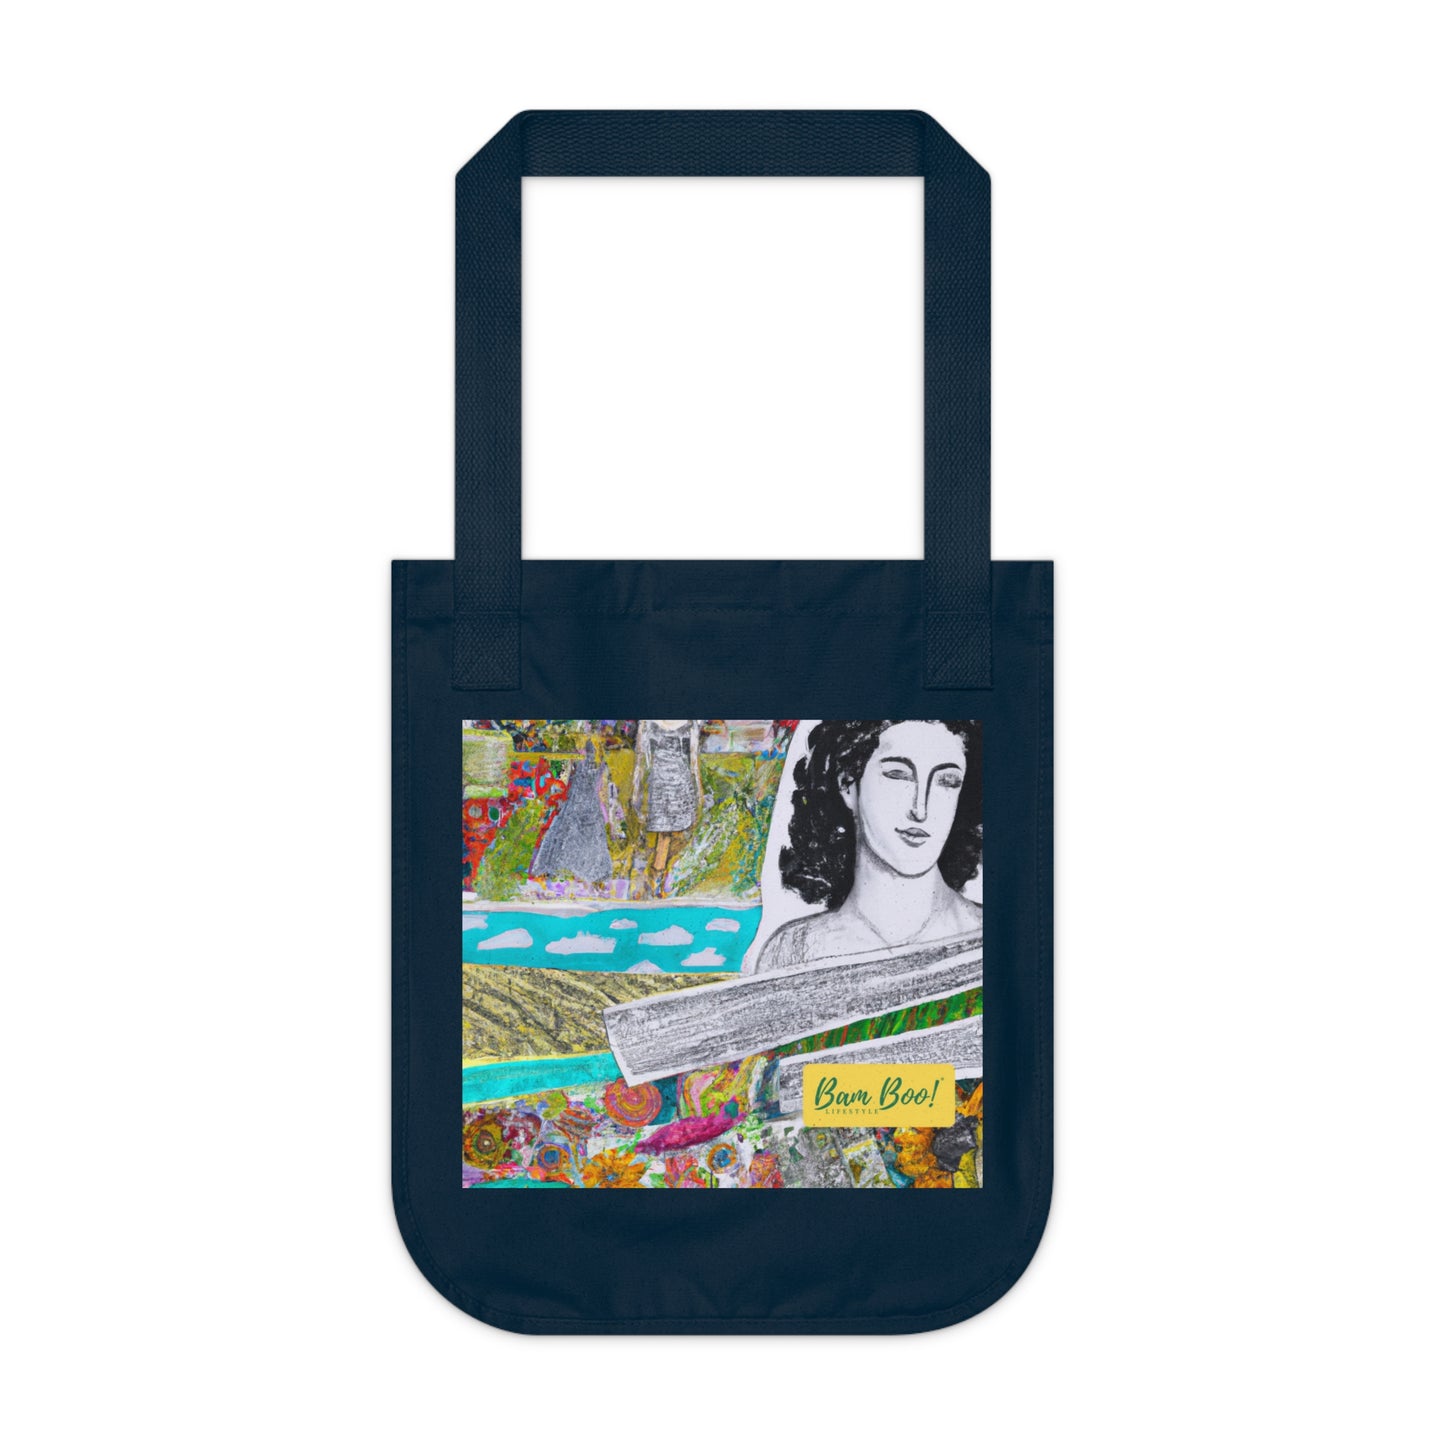 "Mosaic of Memories: A Mixed-Media Collage." - Bam Boo! Lifestyle Eco-friendly Tote Bag